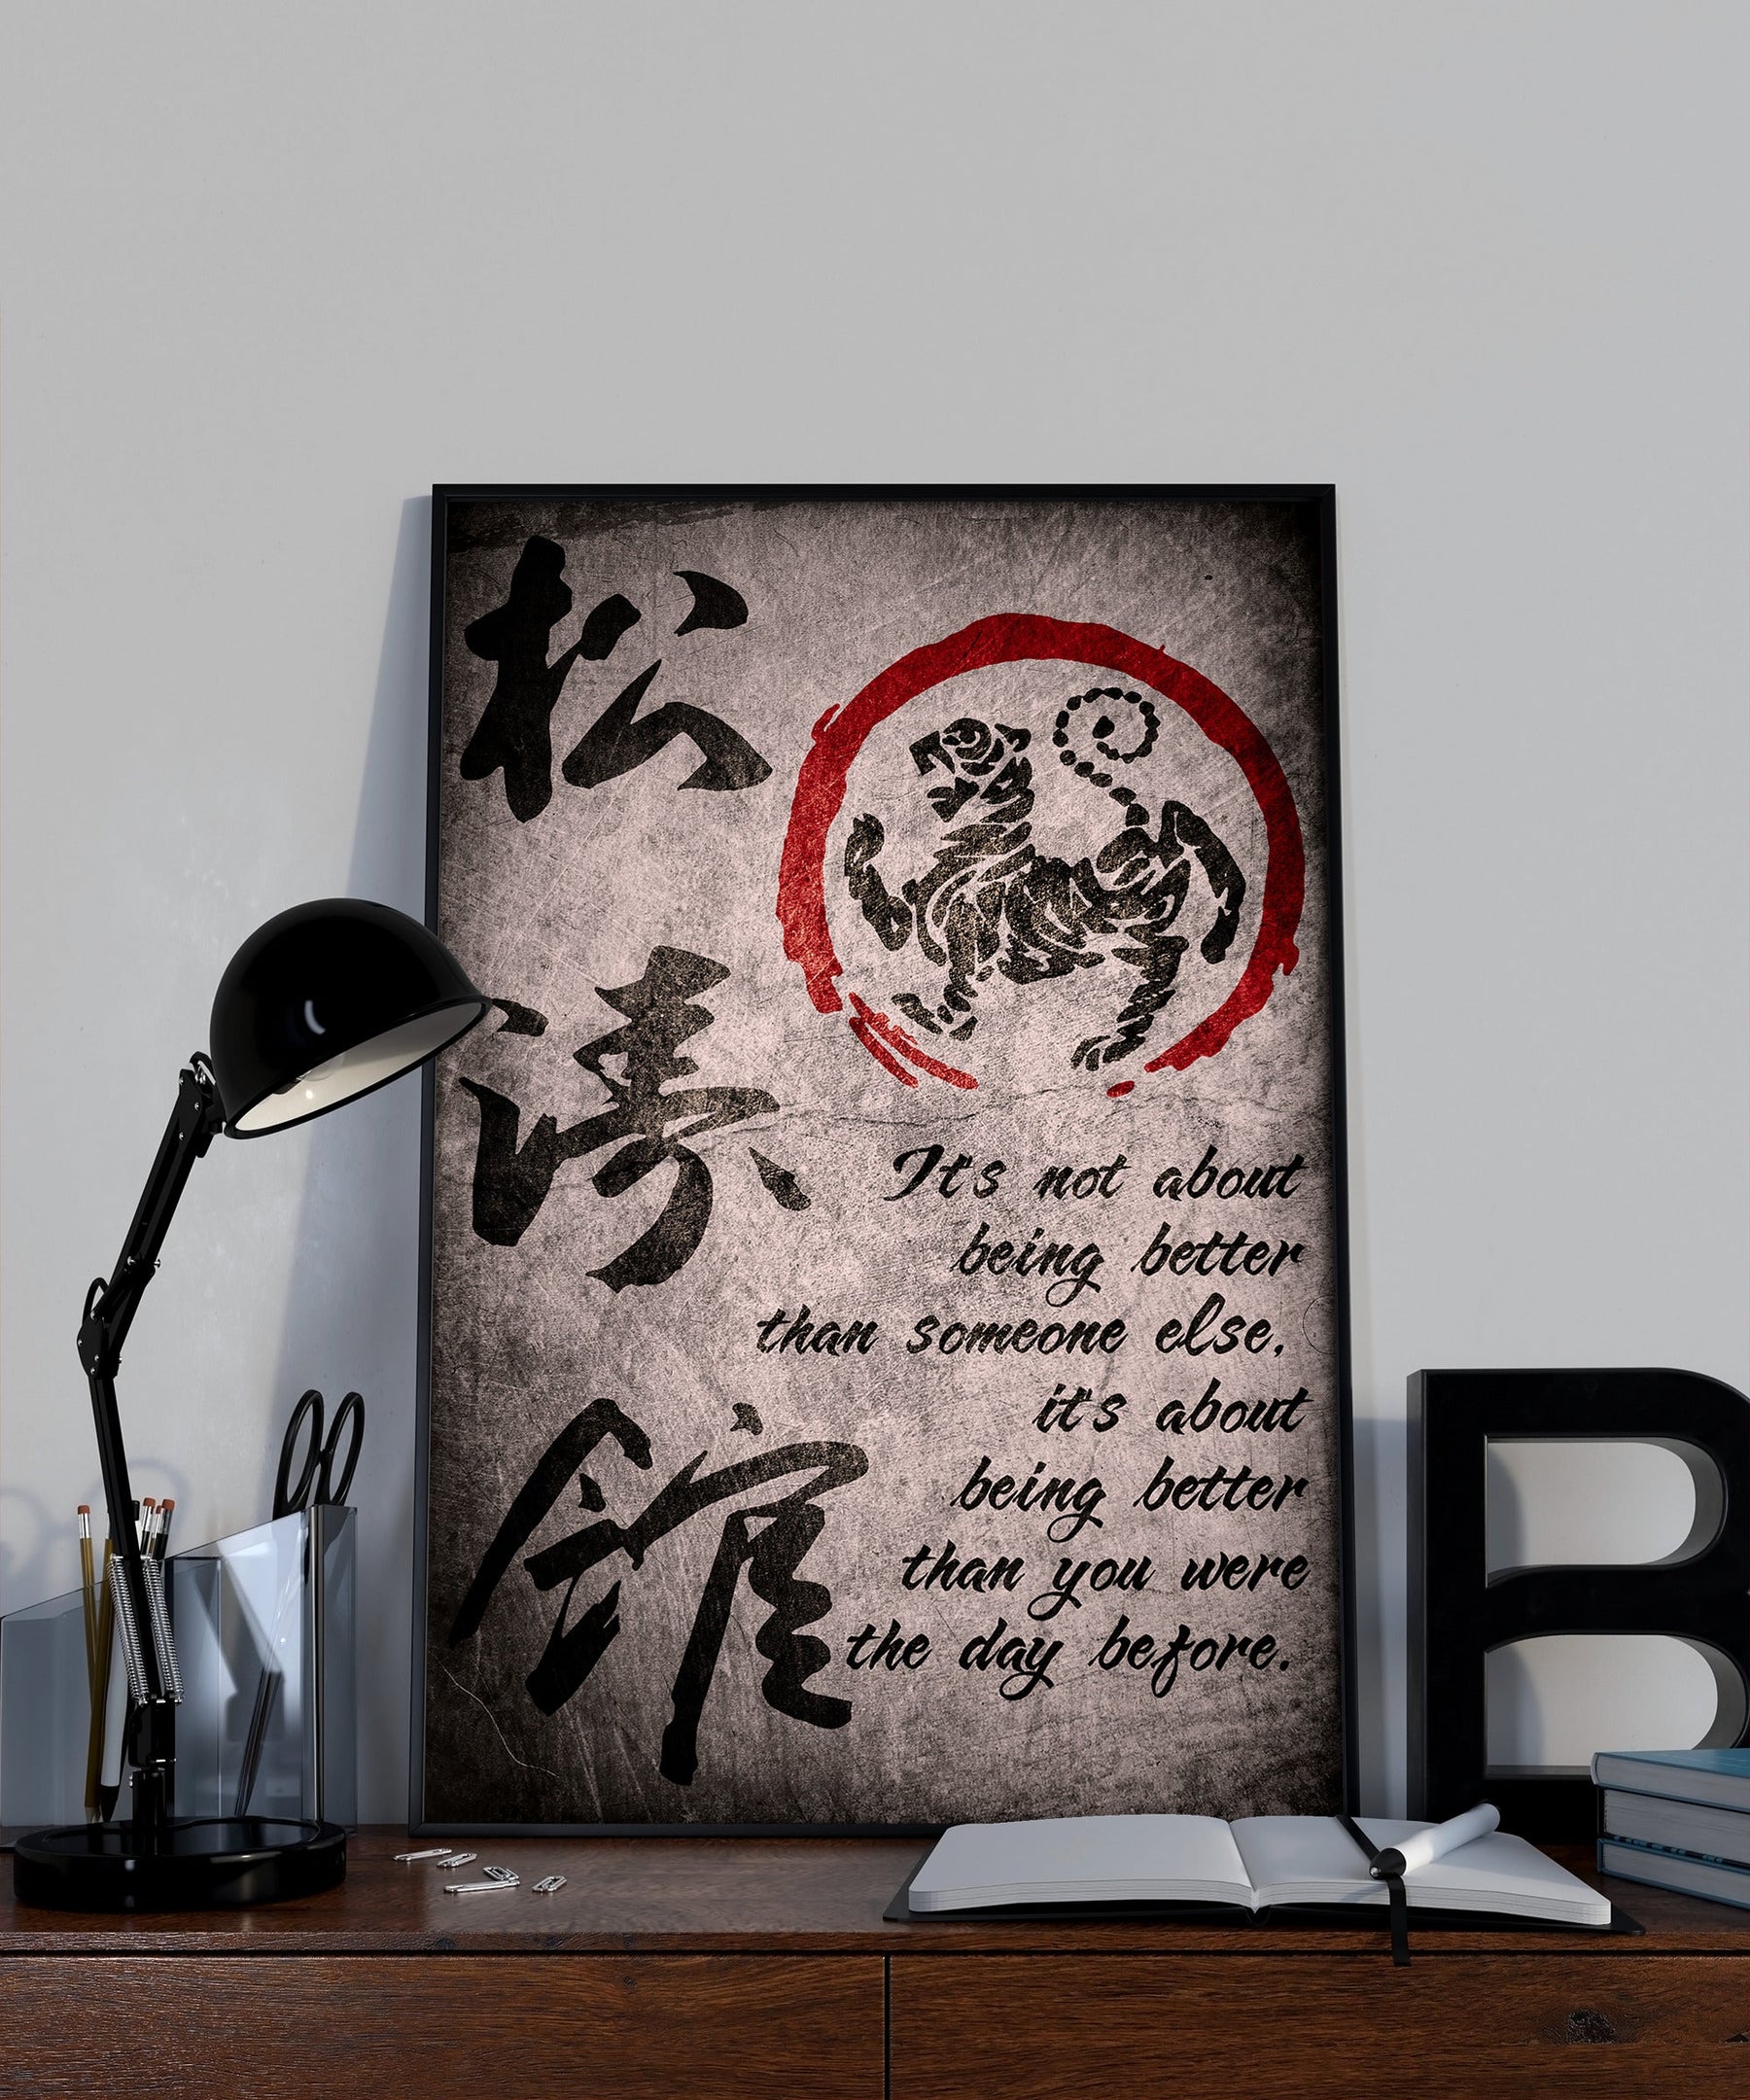 KA029 - It's About Being Better Than You Were The Day Before - Shotokan Karate Kanji  - Vertical Poster - Vertical Canvas - Karate Poster